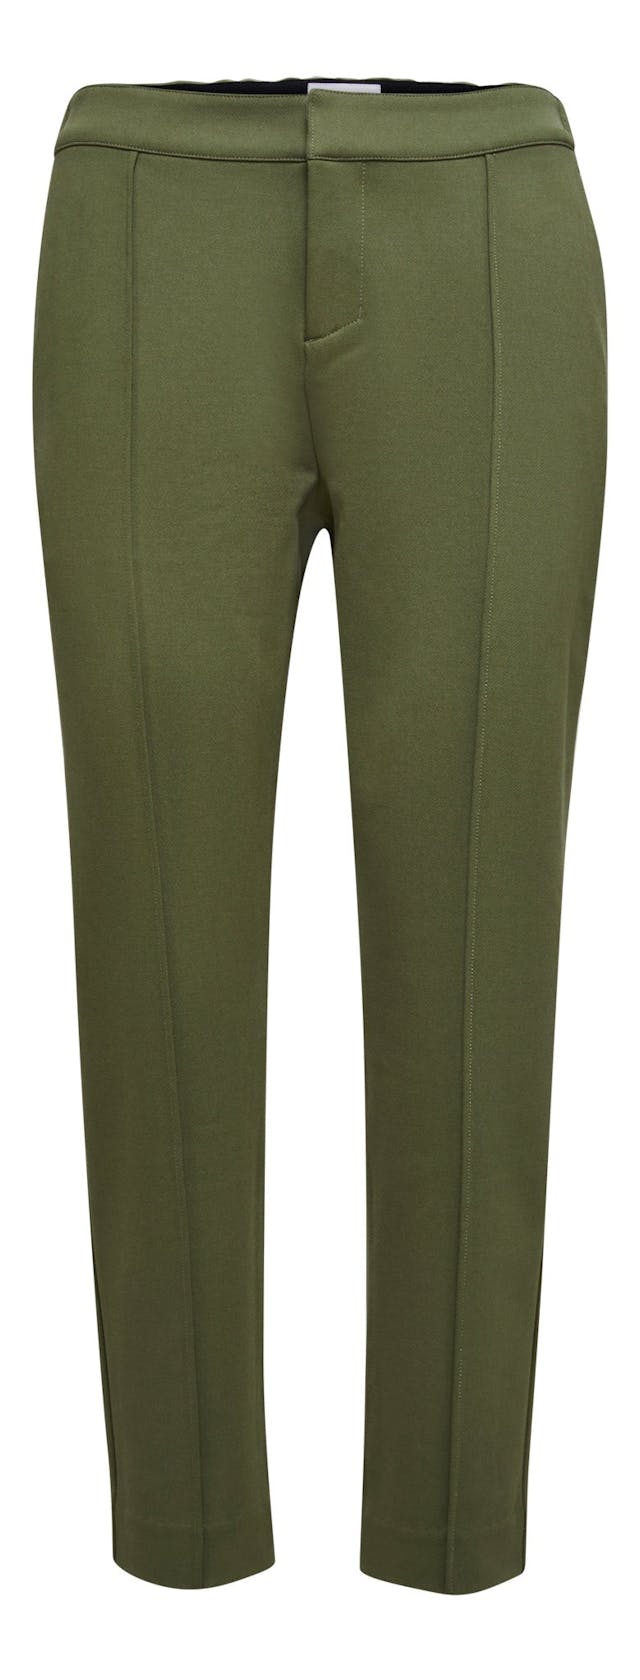 Product image for Soltrano Pant - Women's